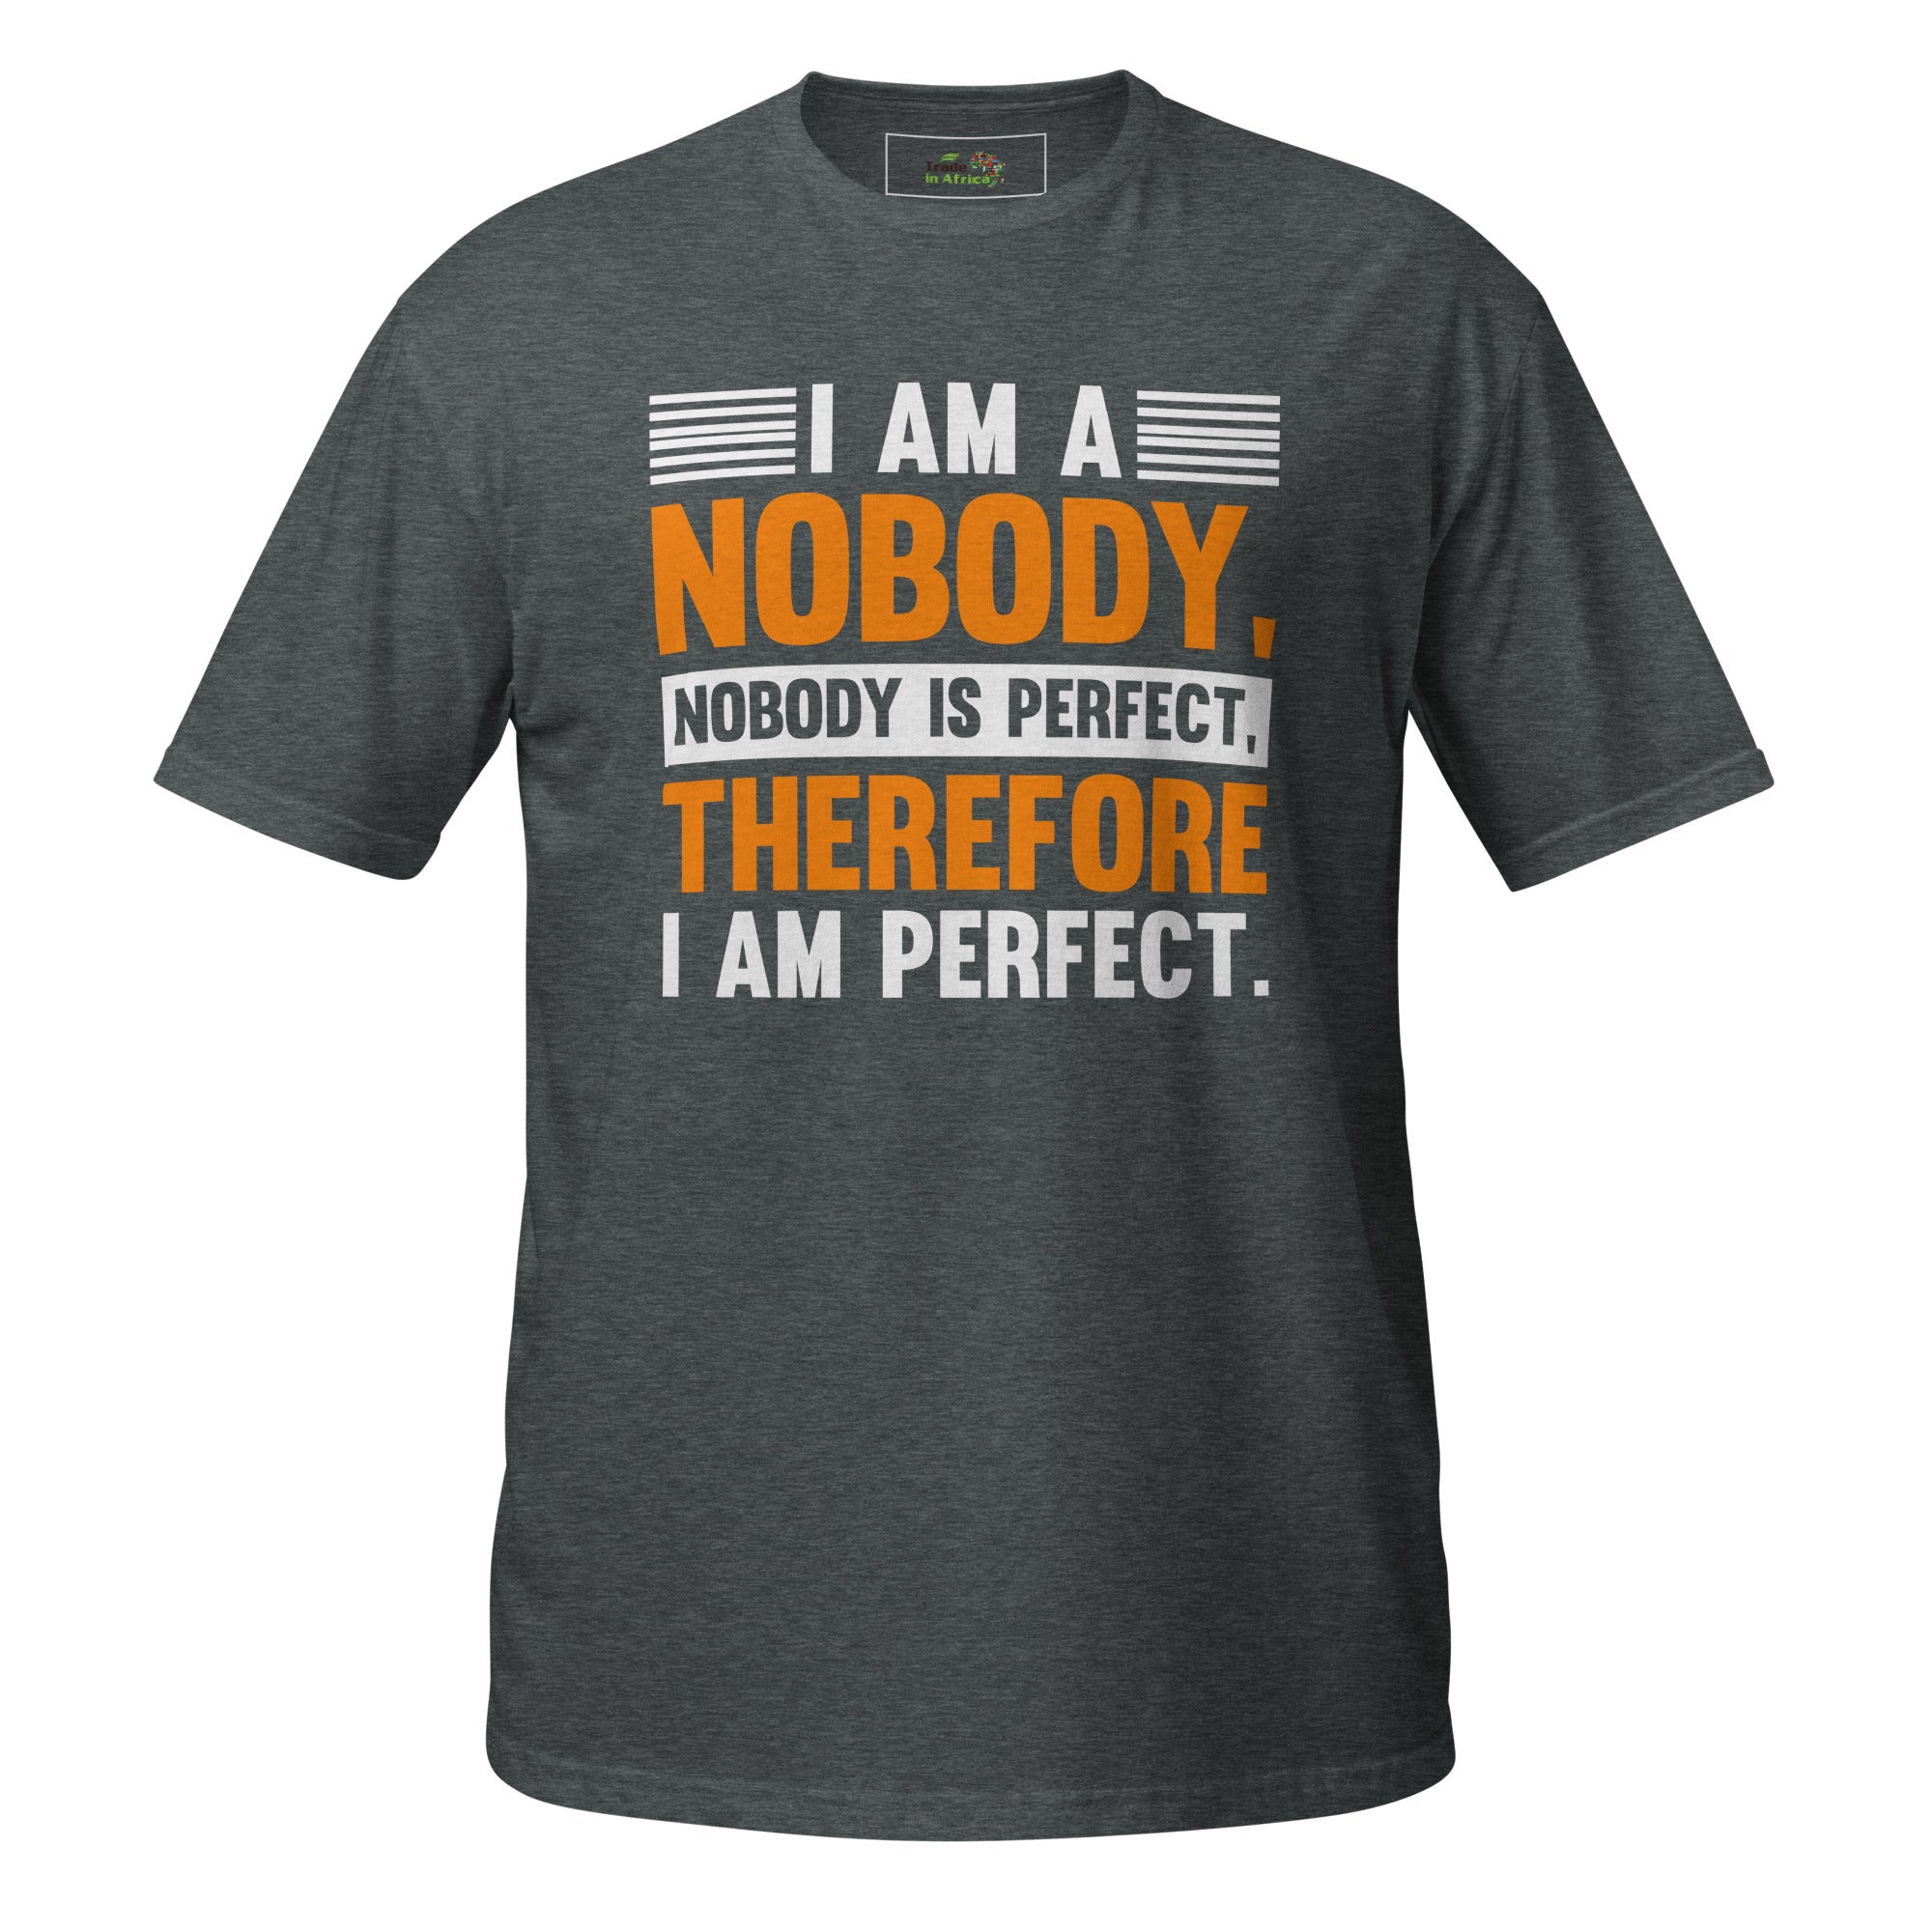 I Am A Nobody - Nobody Is Perfect - Therefore I am Perfect ! T-Shirt